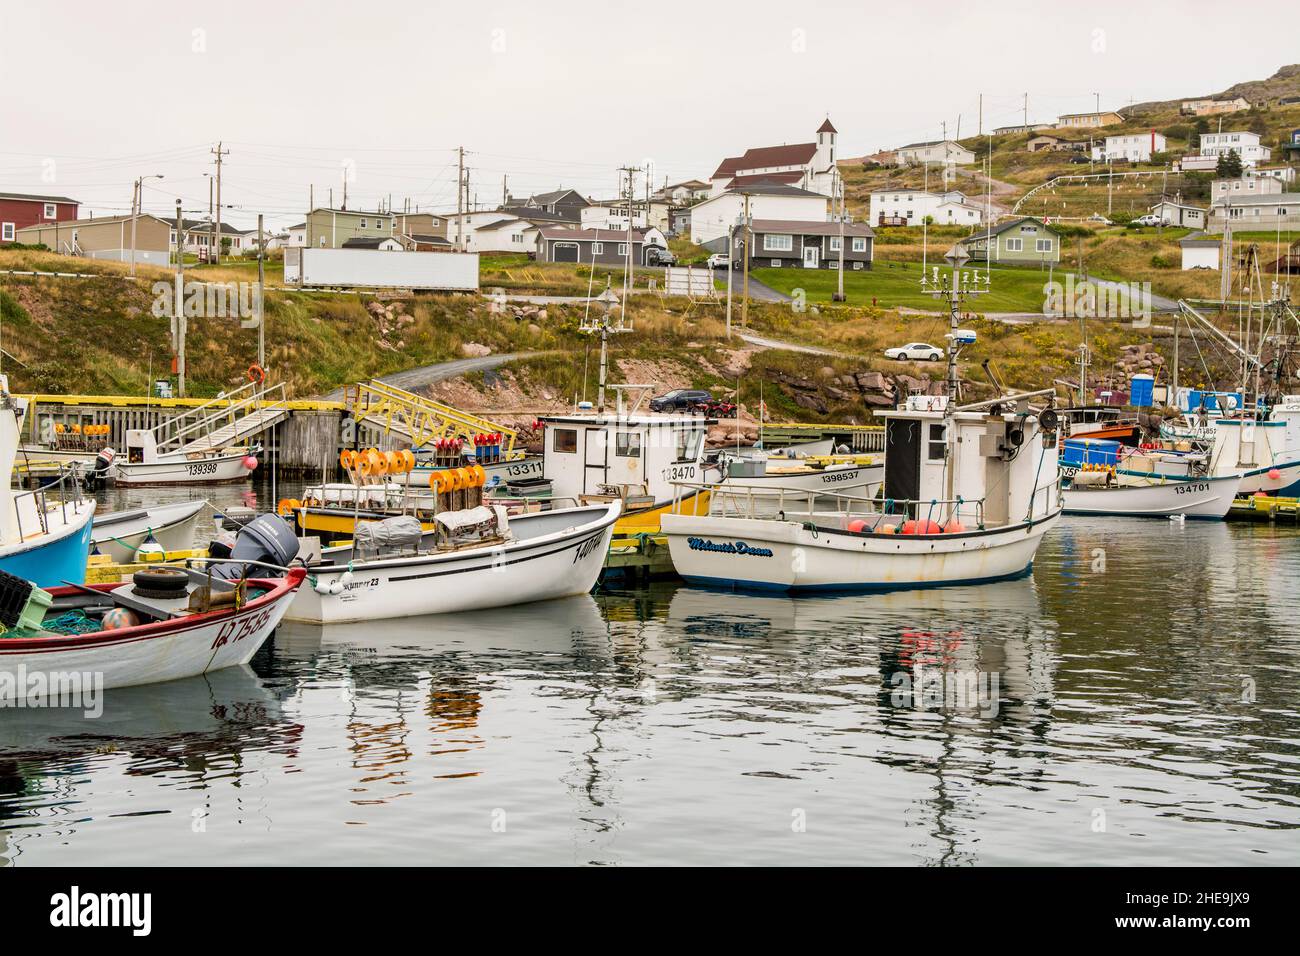 Fishing boats in harbour, Bay de Verde, Conception Bay, Newfoundland, Canada. Stock Photo